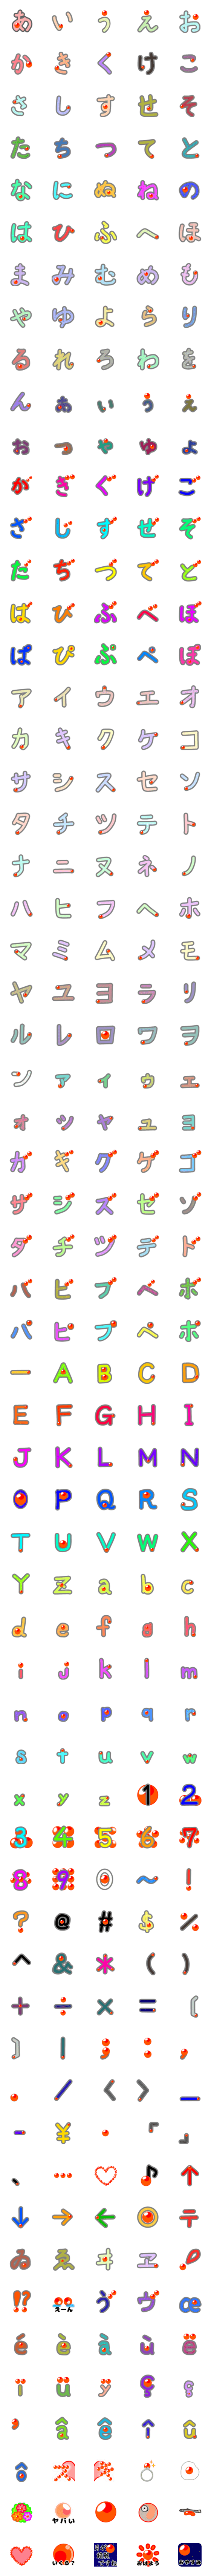 [LINE絵文字]イクラと一緒の画像一覧